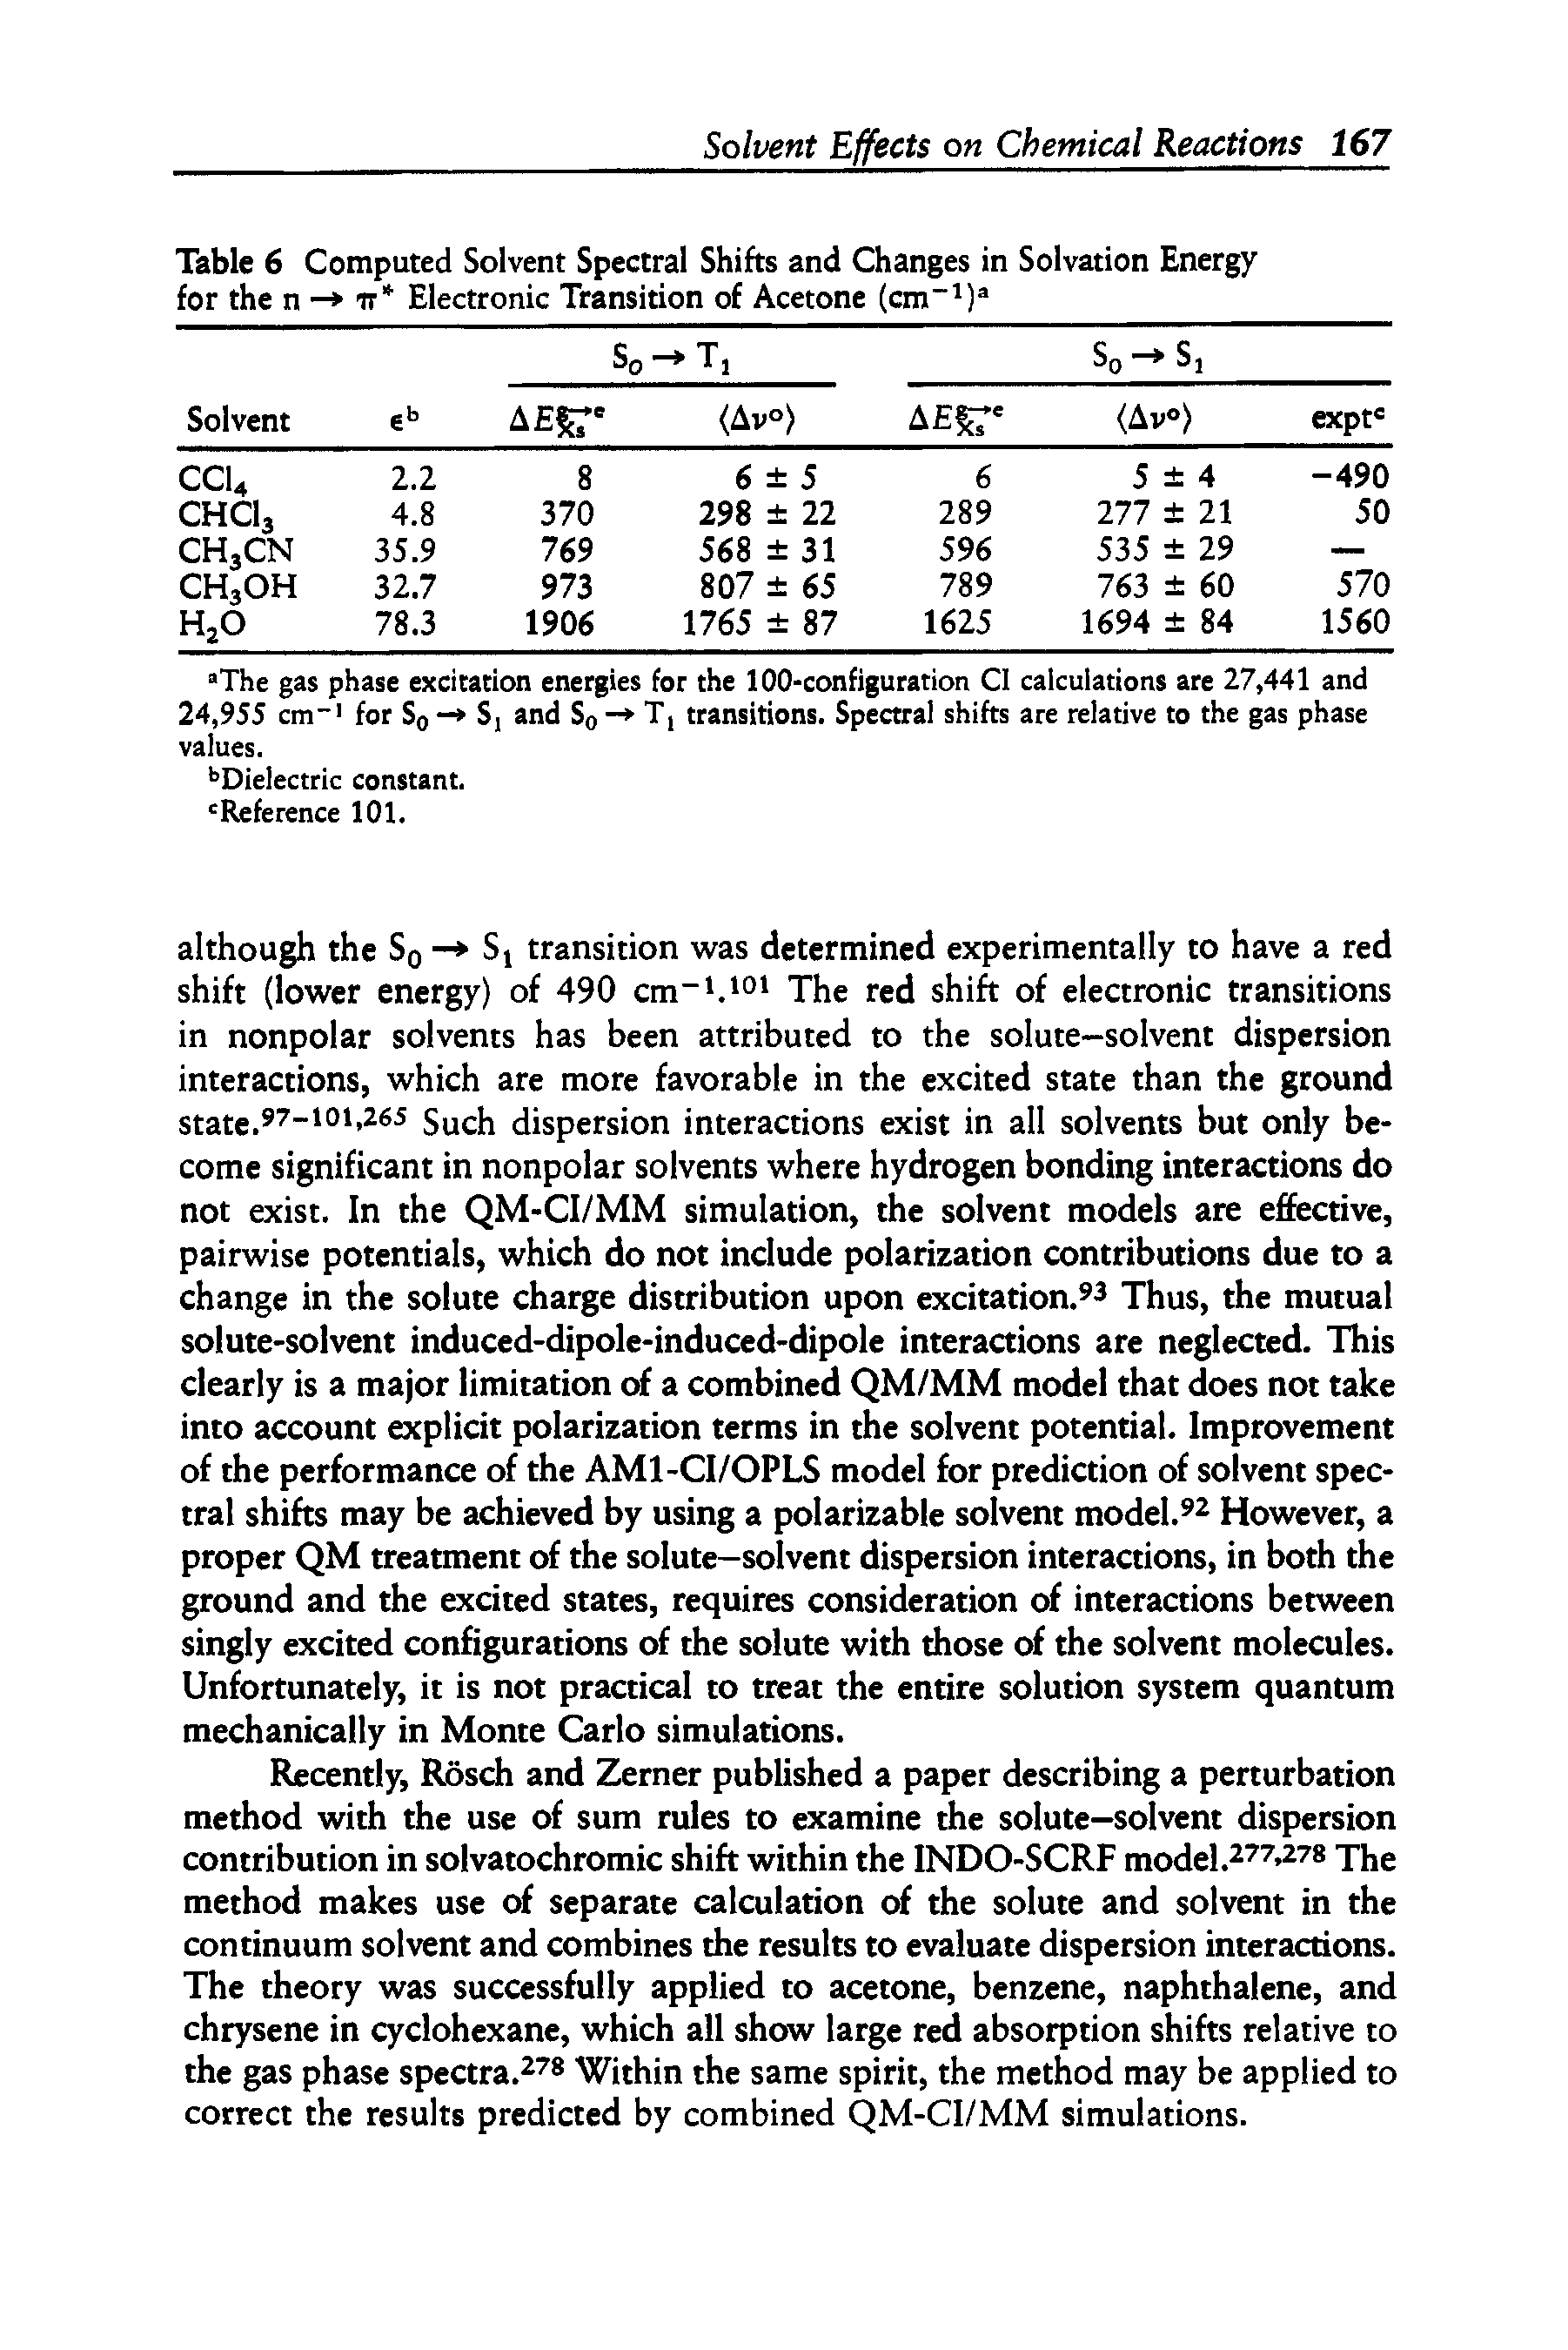 Table 6 Computed Solvent Spectral Shifts and Changes in Solvation Energy for the n - >17 Electronic Transition of Acetone (cm ) ...